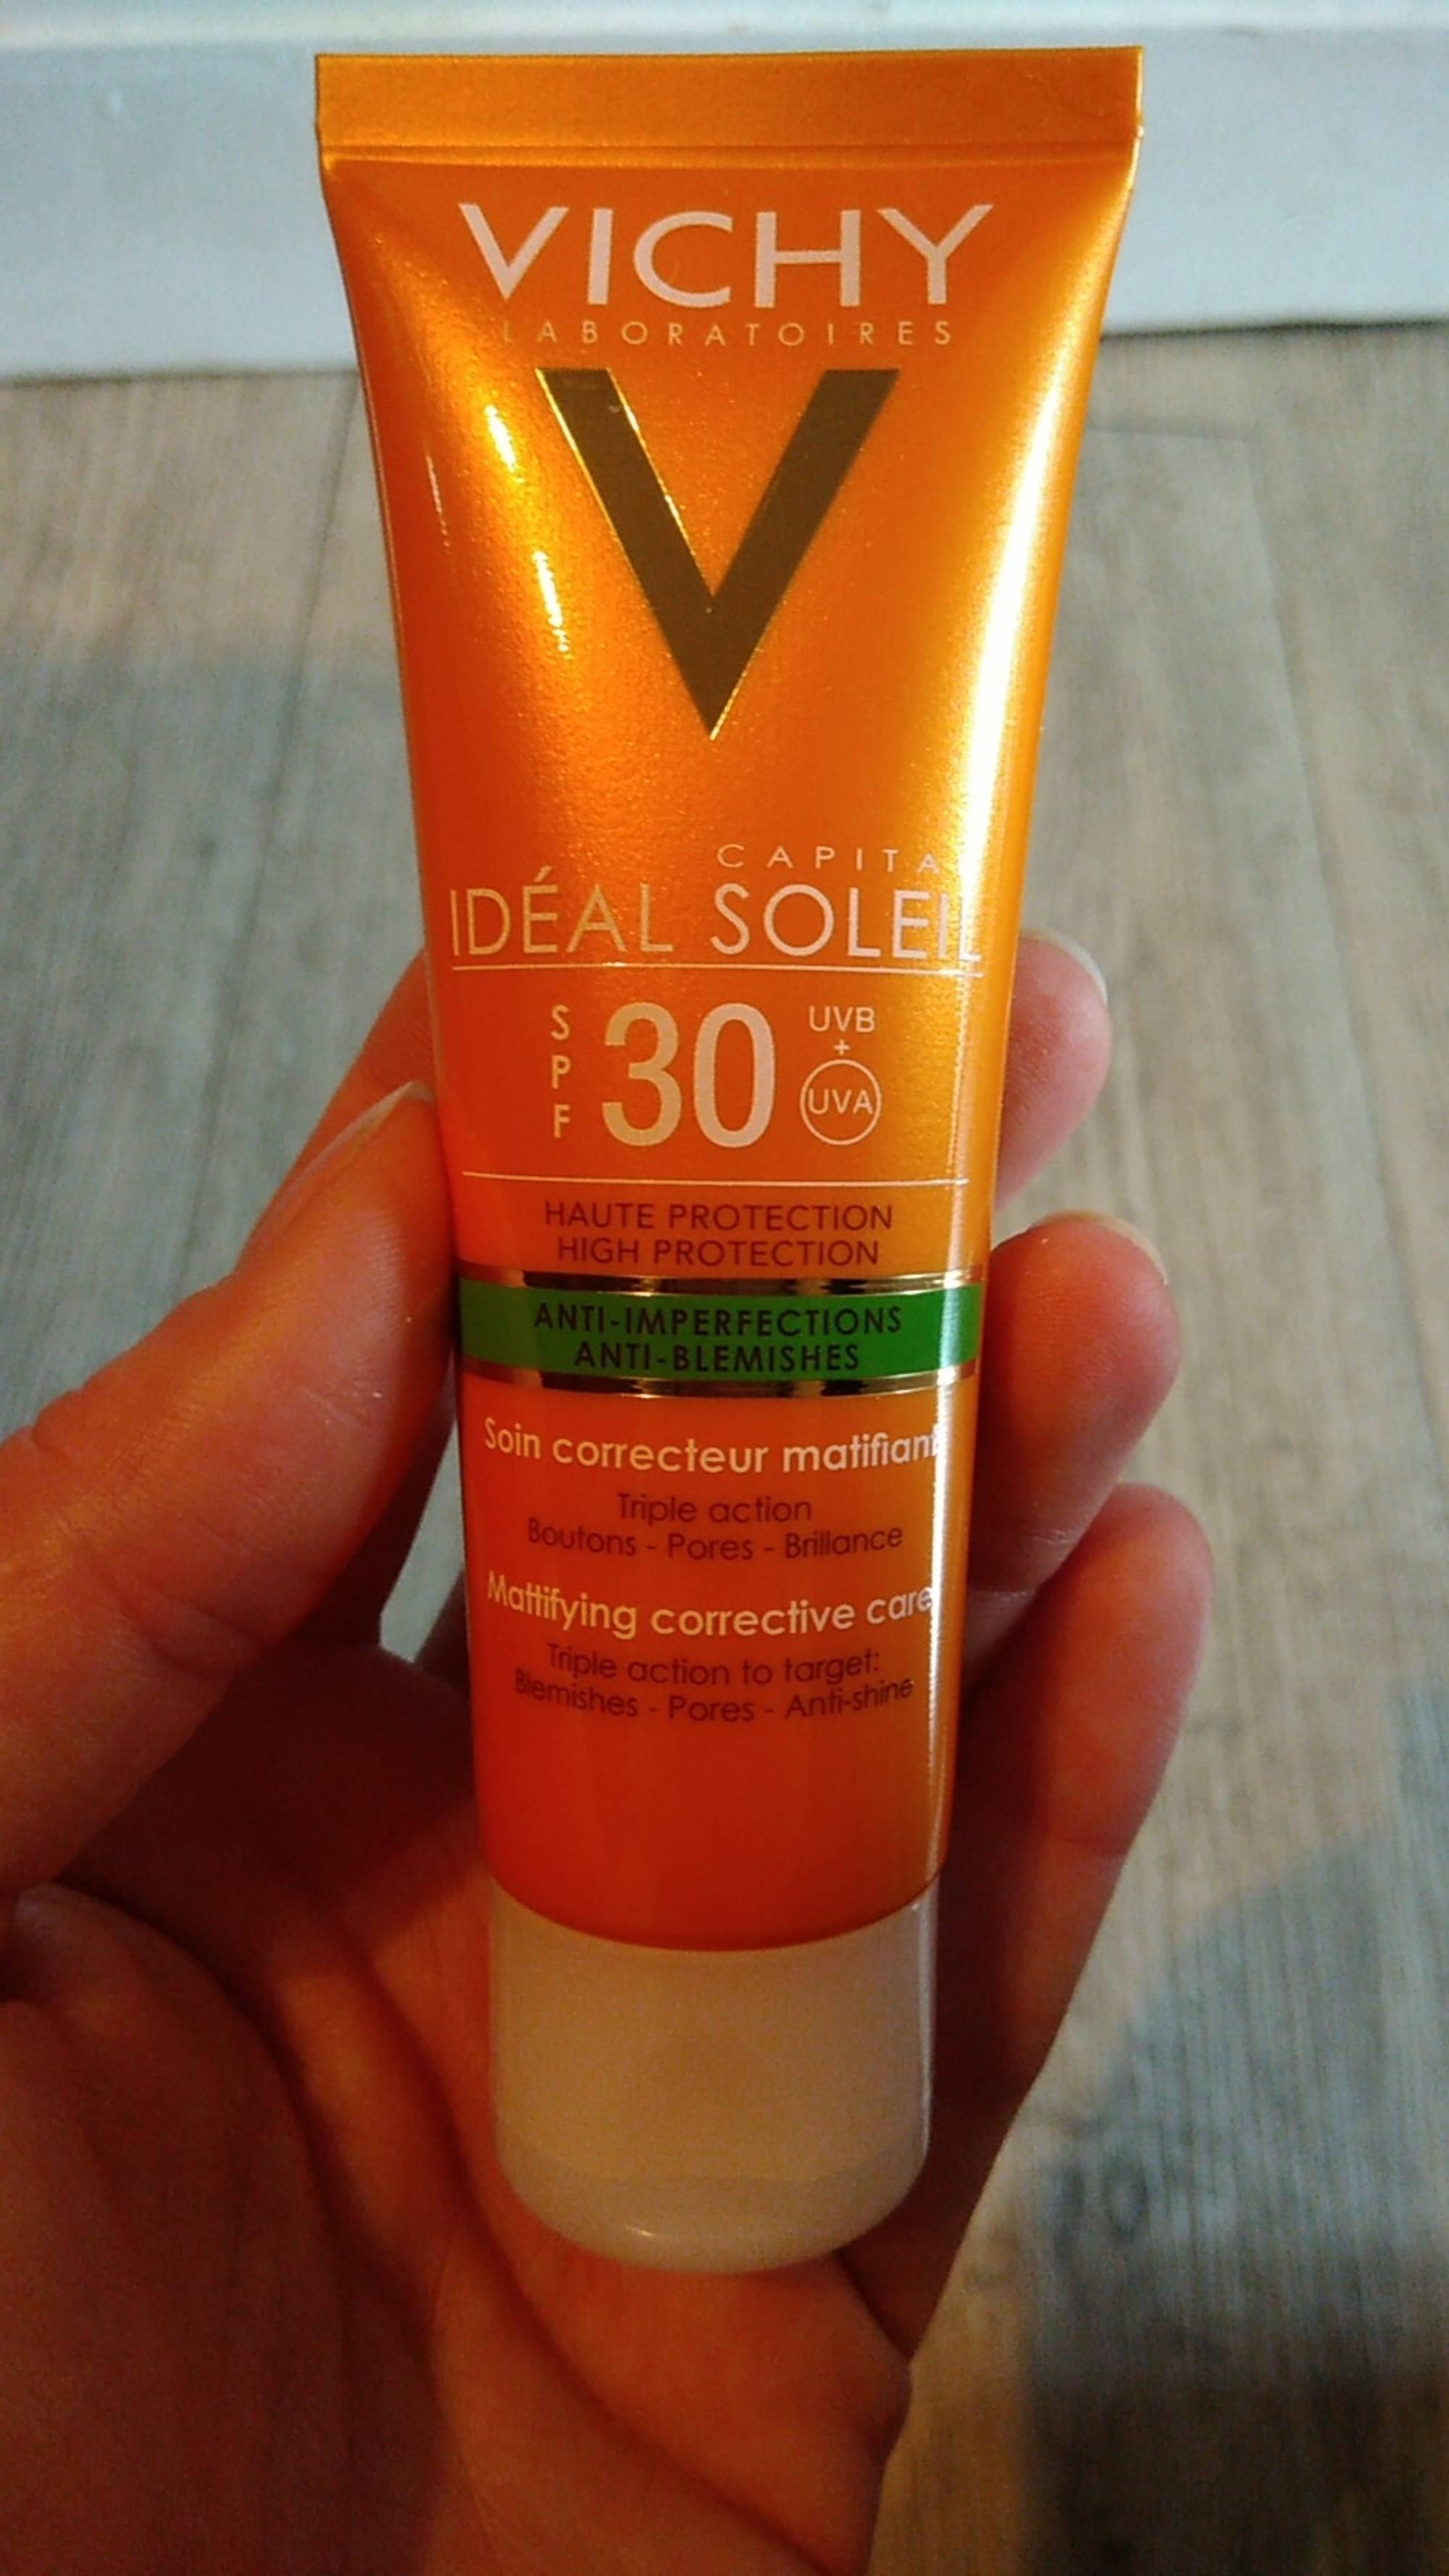 VICHY - Idéal soleil - Soin anti-imperfections spf 30+